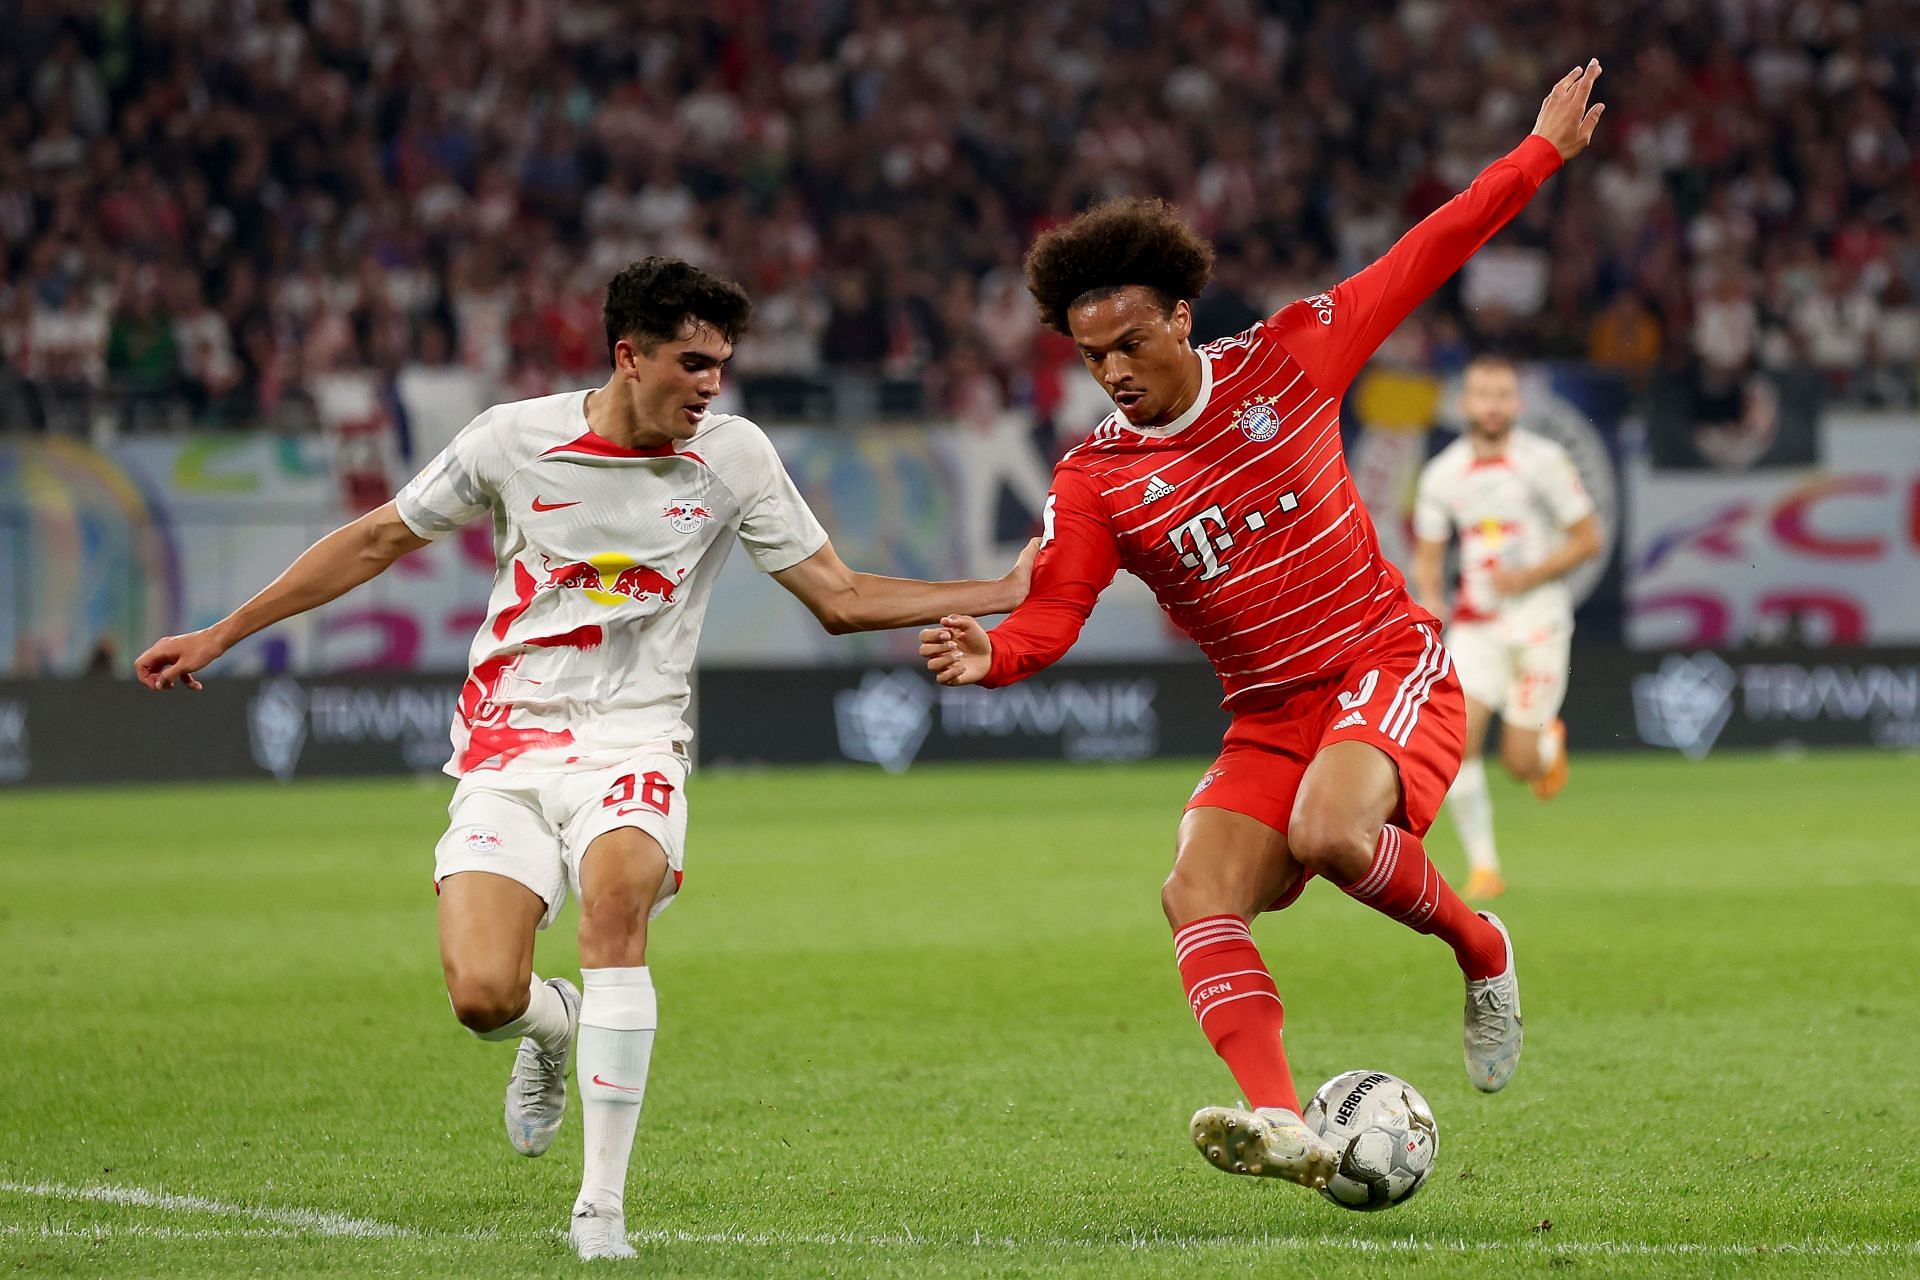 RB Leipzig vs Bayern Munich Prediction and Betting Tips January 20, 2023